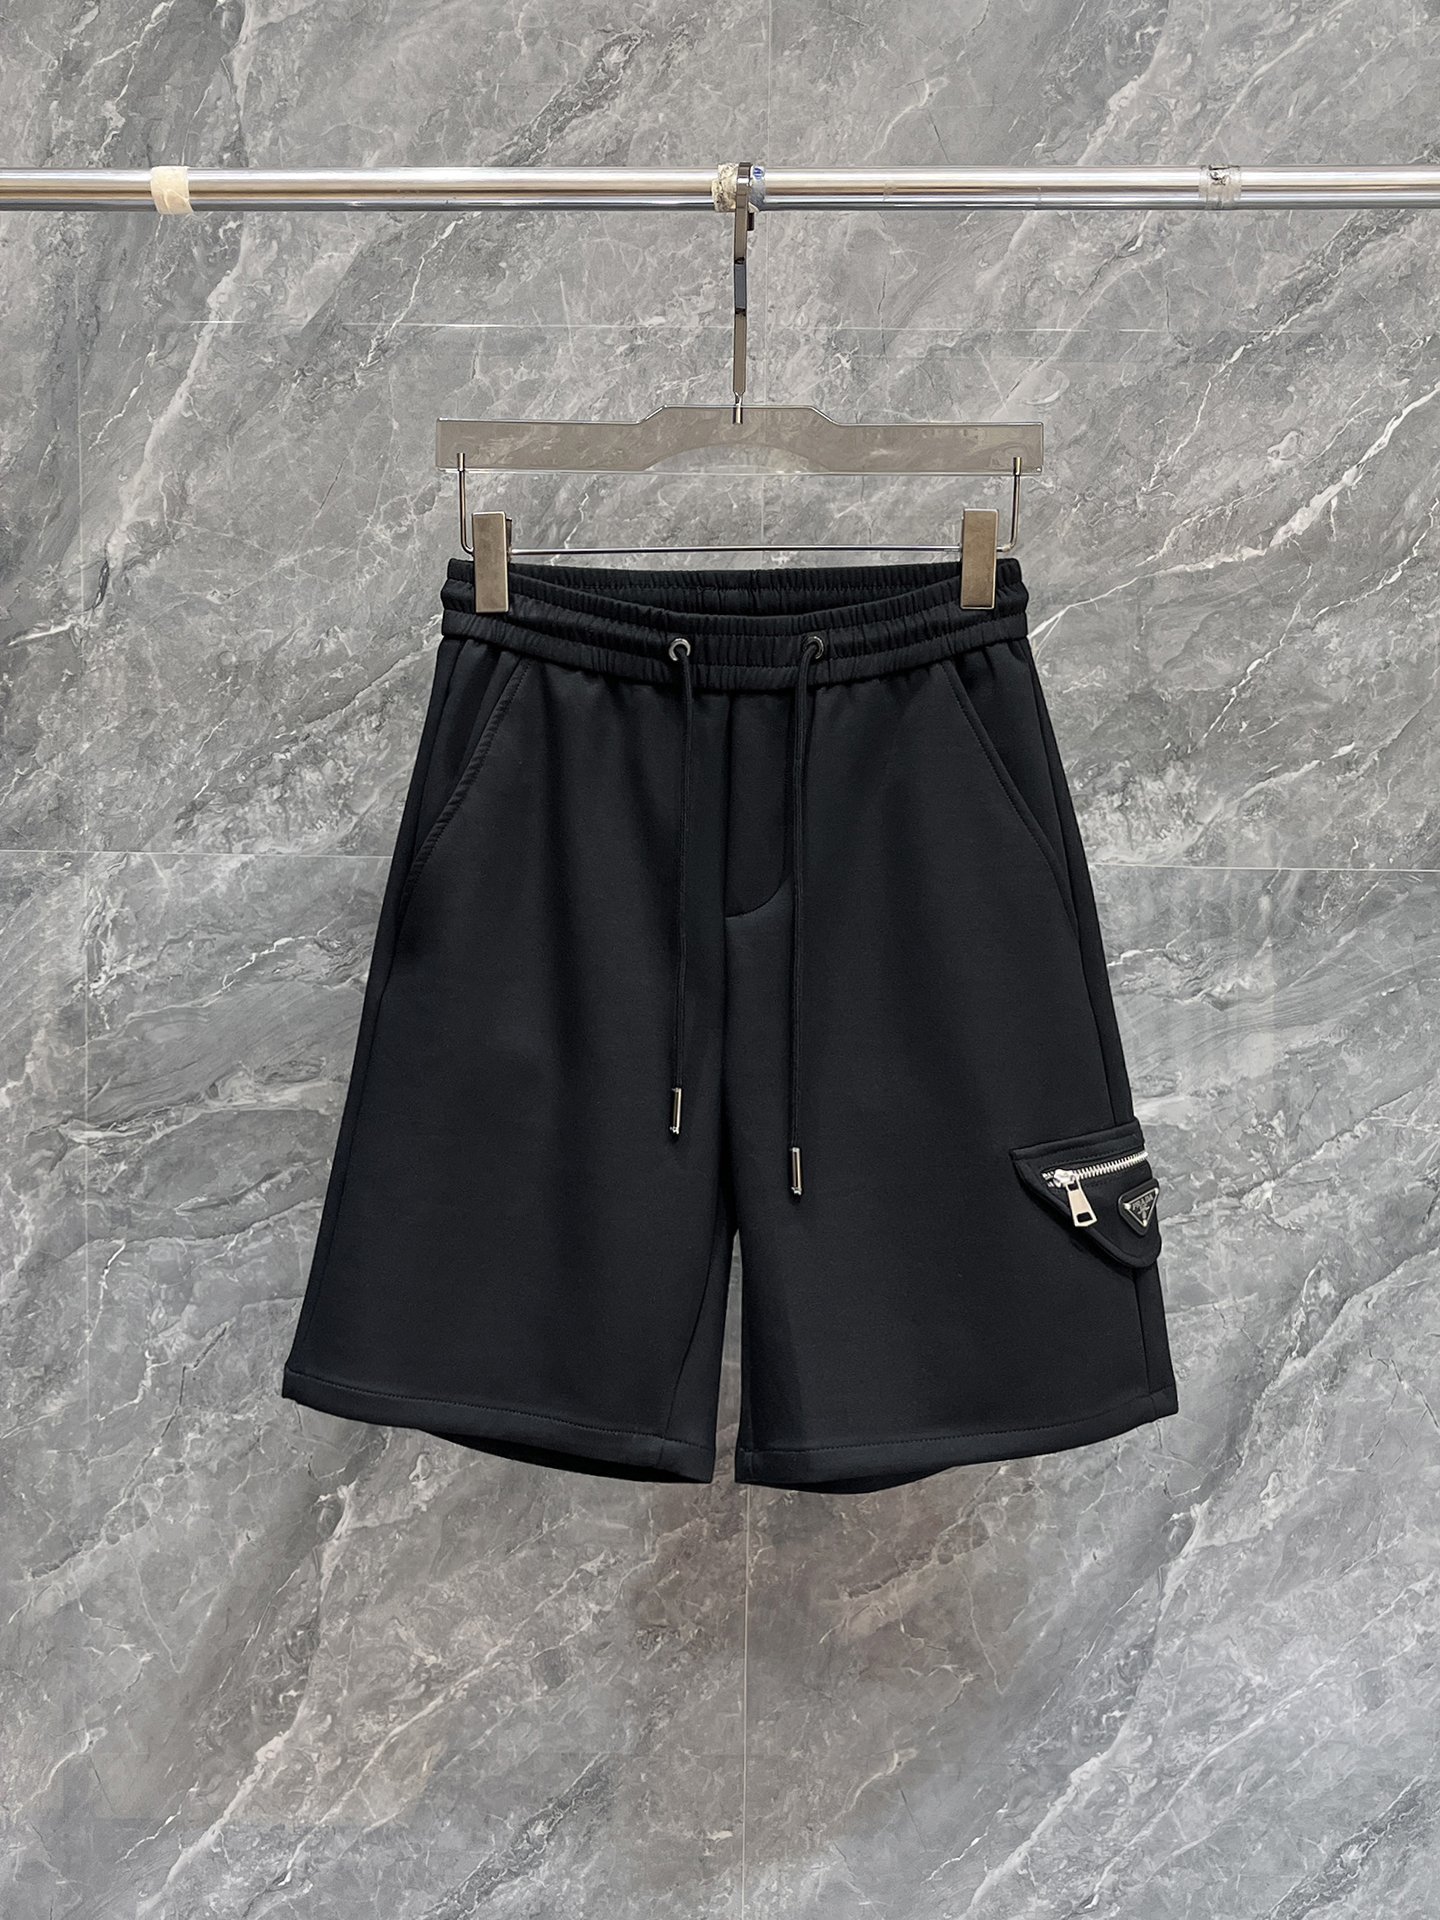 First Copy
 Prada Clothing Shorts Men Summer Collection Casual